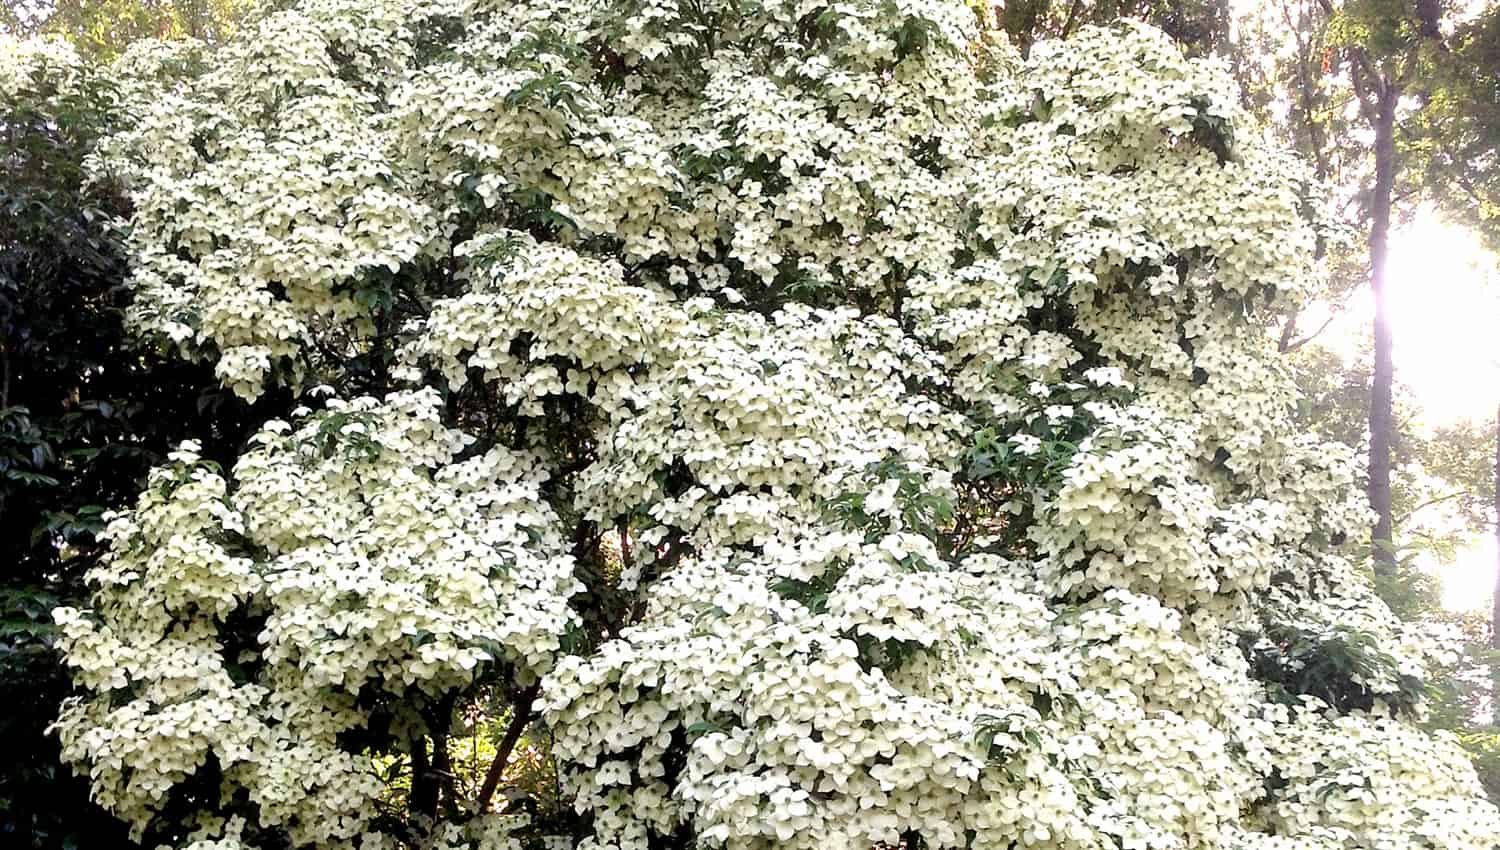 Hundreds of Empress of China white blooms cover this dogwood tree